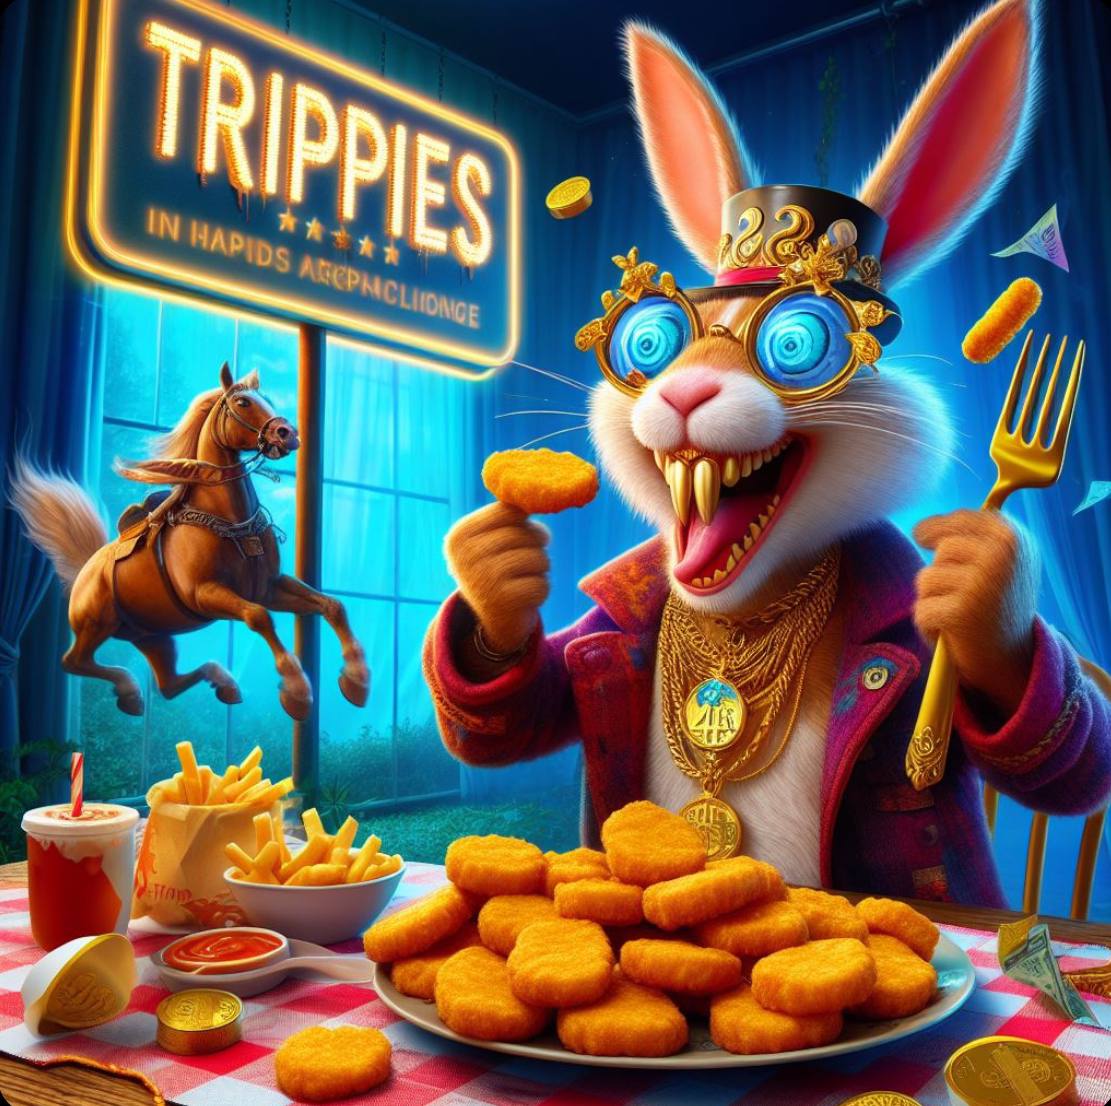 Word on the street is @TRIPPIES LOVE NUGGIES AND ONLY EAT THEM @WifForkinKnife !!!!! $WSK